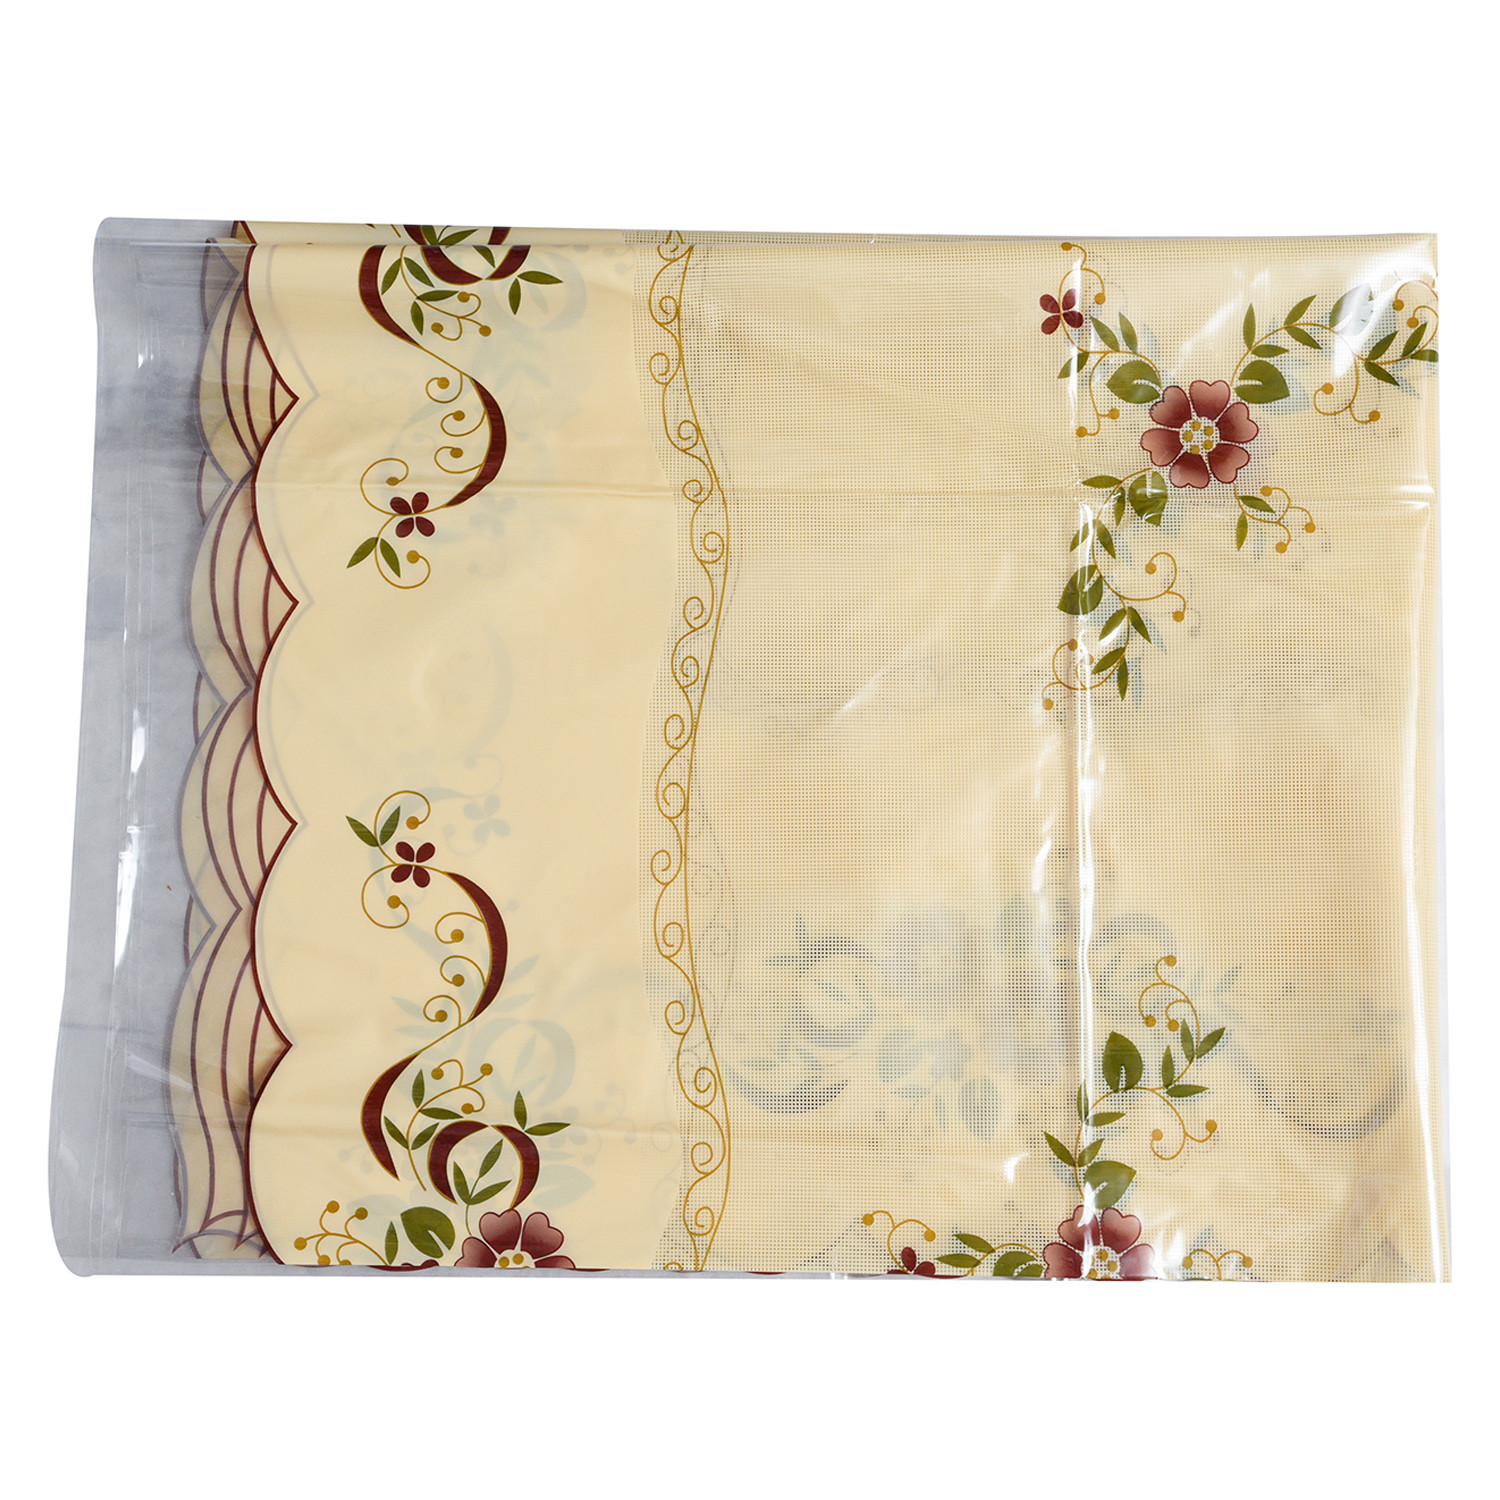 Kuber Industries Center Table Cover | Alloy PVC Flower Center Table Cover | Luxurious Table Protector for Everyday Use | 40x60 Inch | Cream